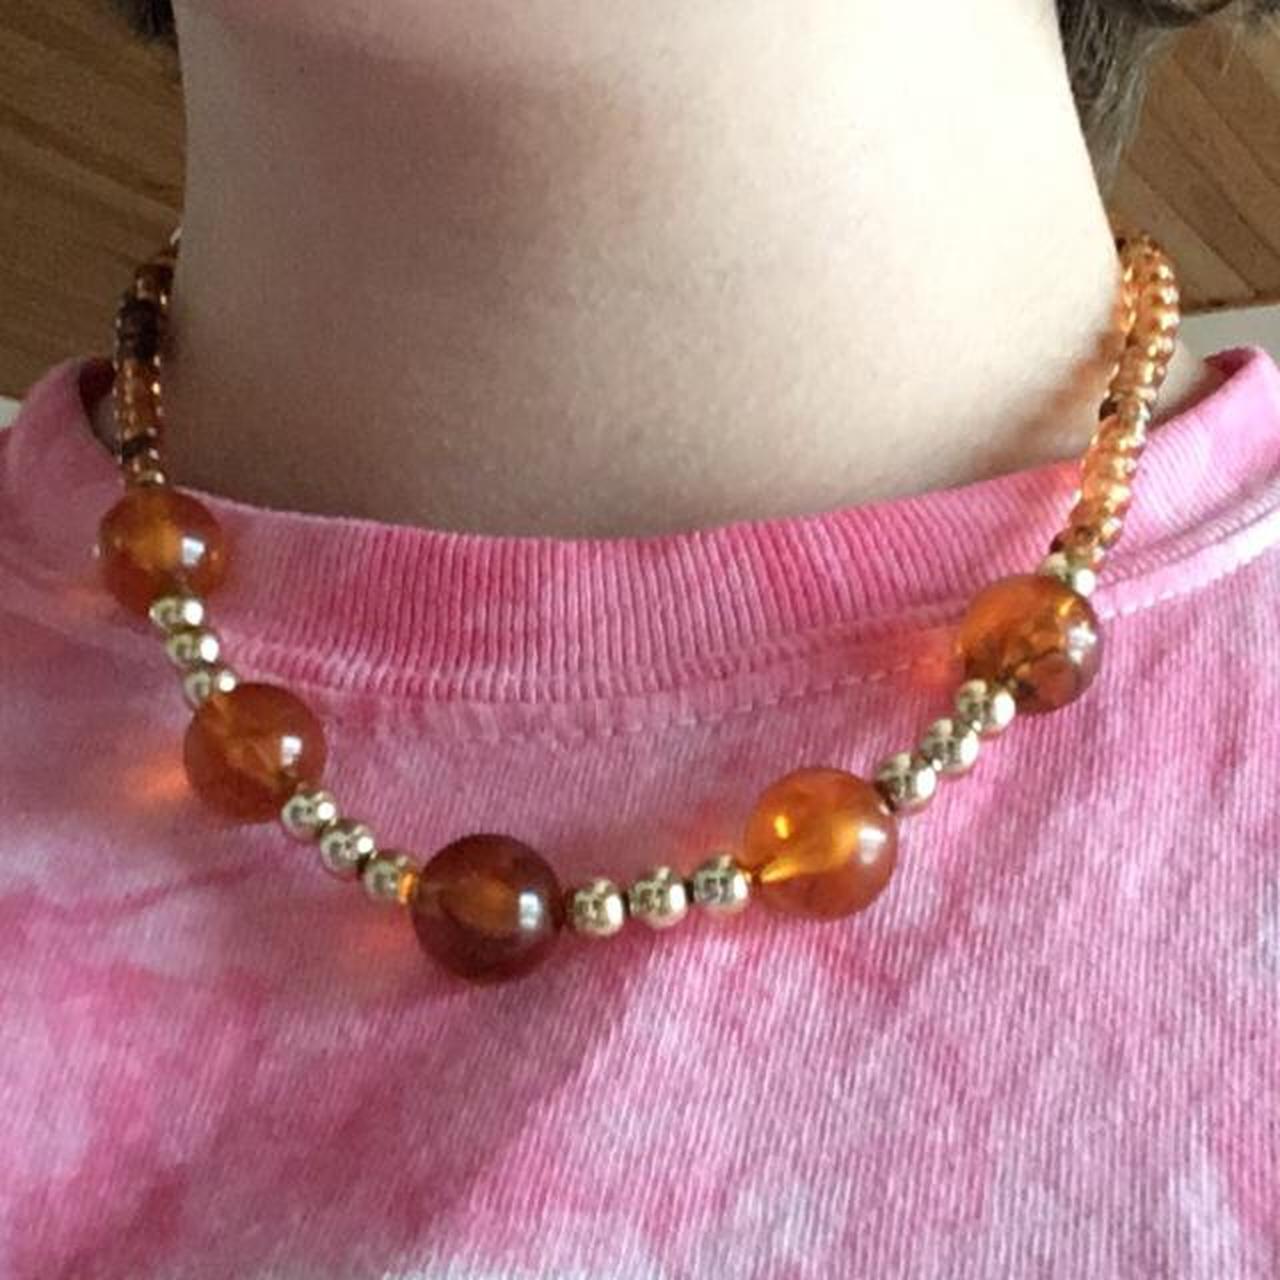 Product Image 2 - Stunning vintage faux-amber necklace. It